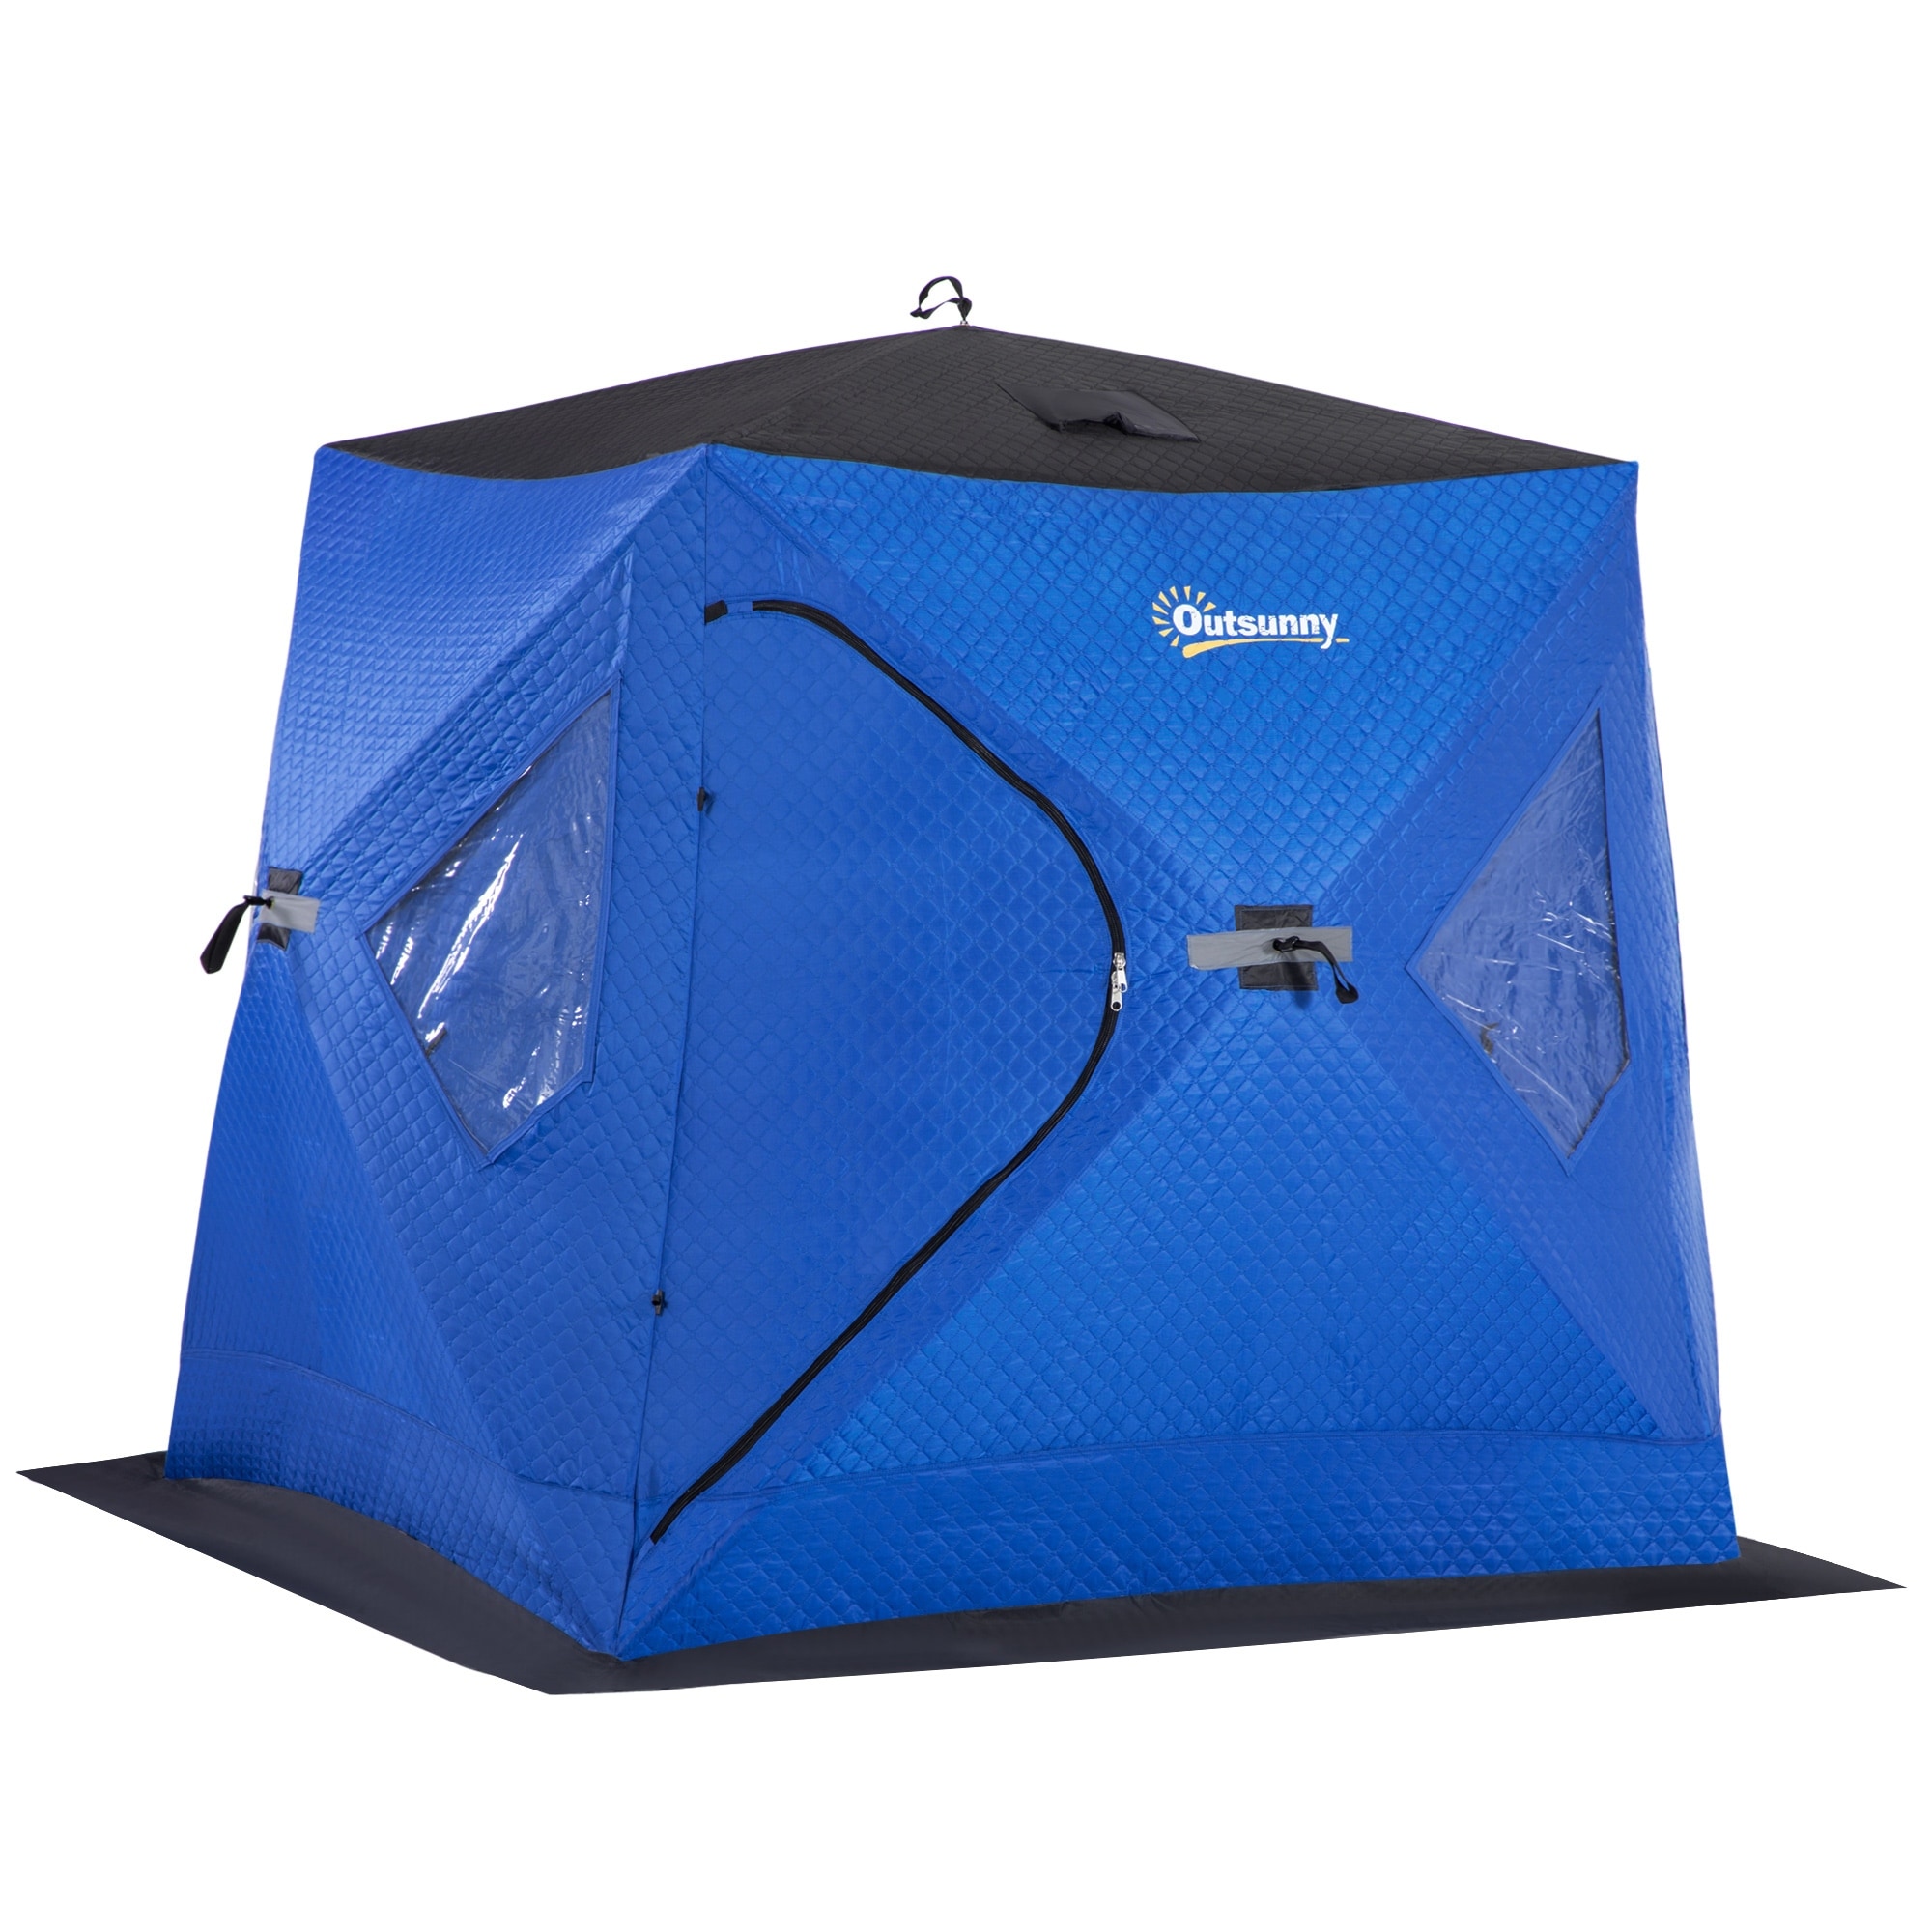 Outsunny 2 Person Insulated Ice Fishing Shelter Pop-Up Portable Ice Fishing  Tent - N/A